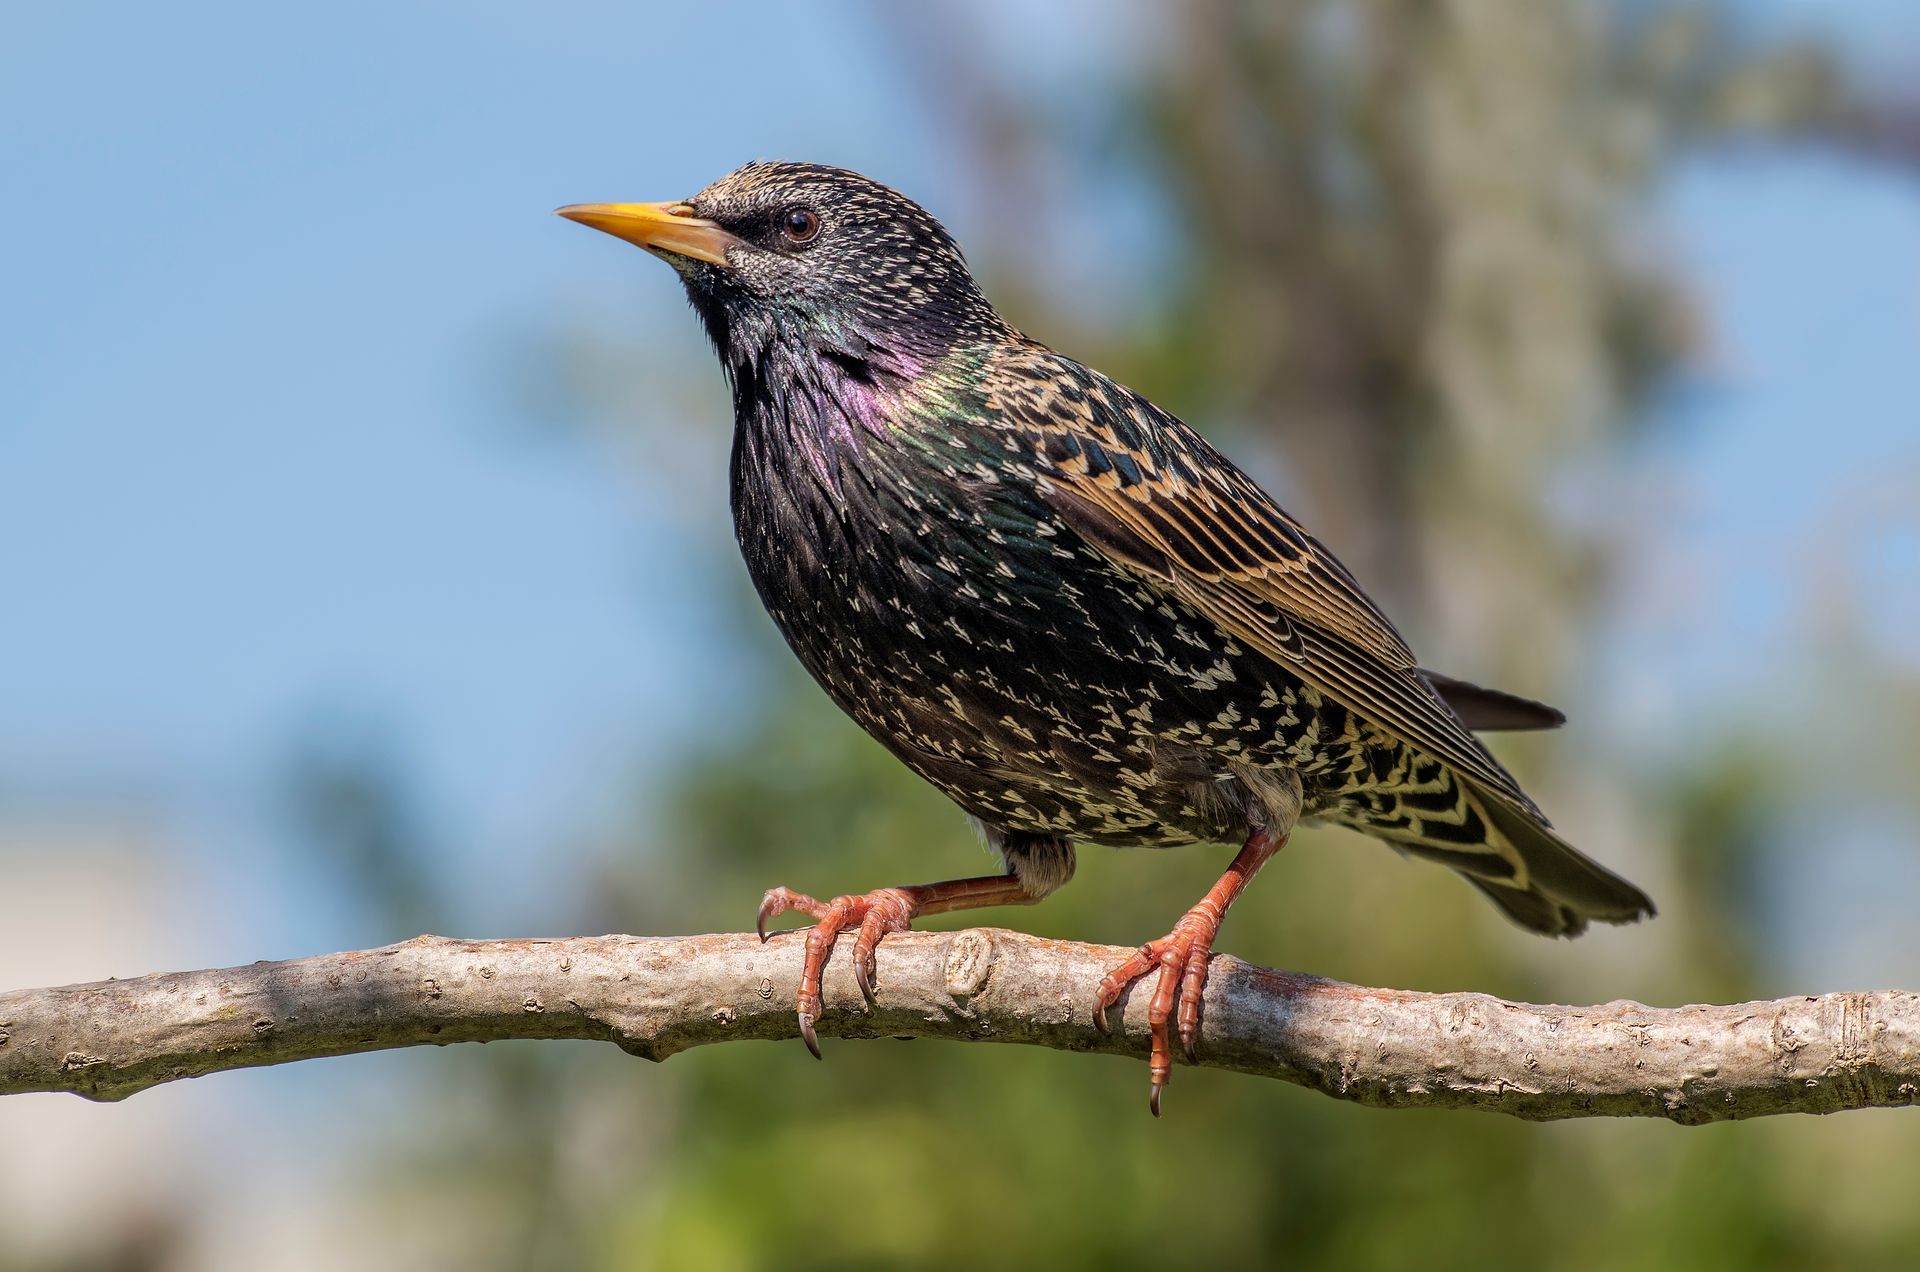 a starling perched on a tree branch with a yellow beak .